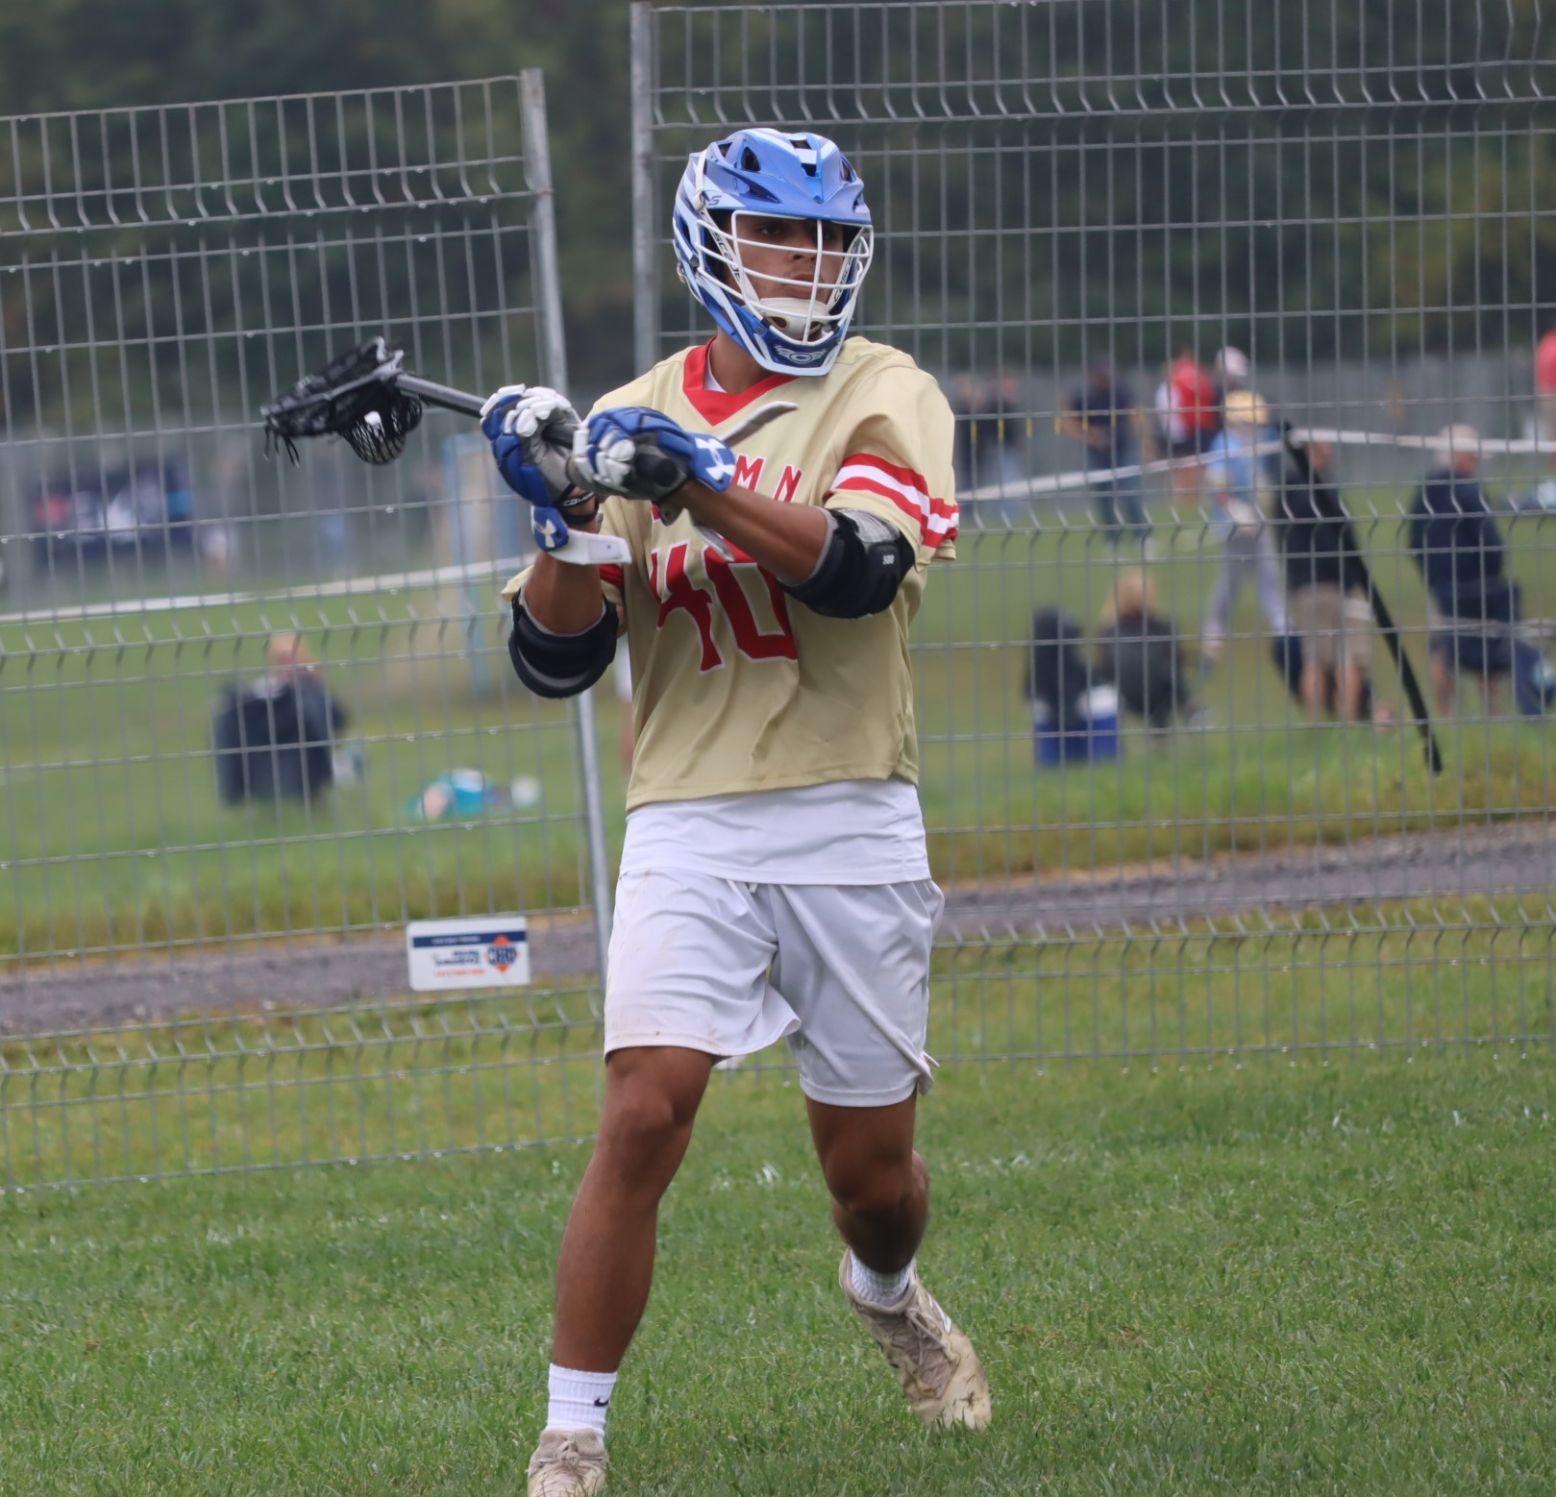 Matteo Corsi, 2021 Standout Lacrosse Player at the National All Star Games